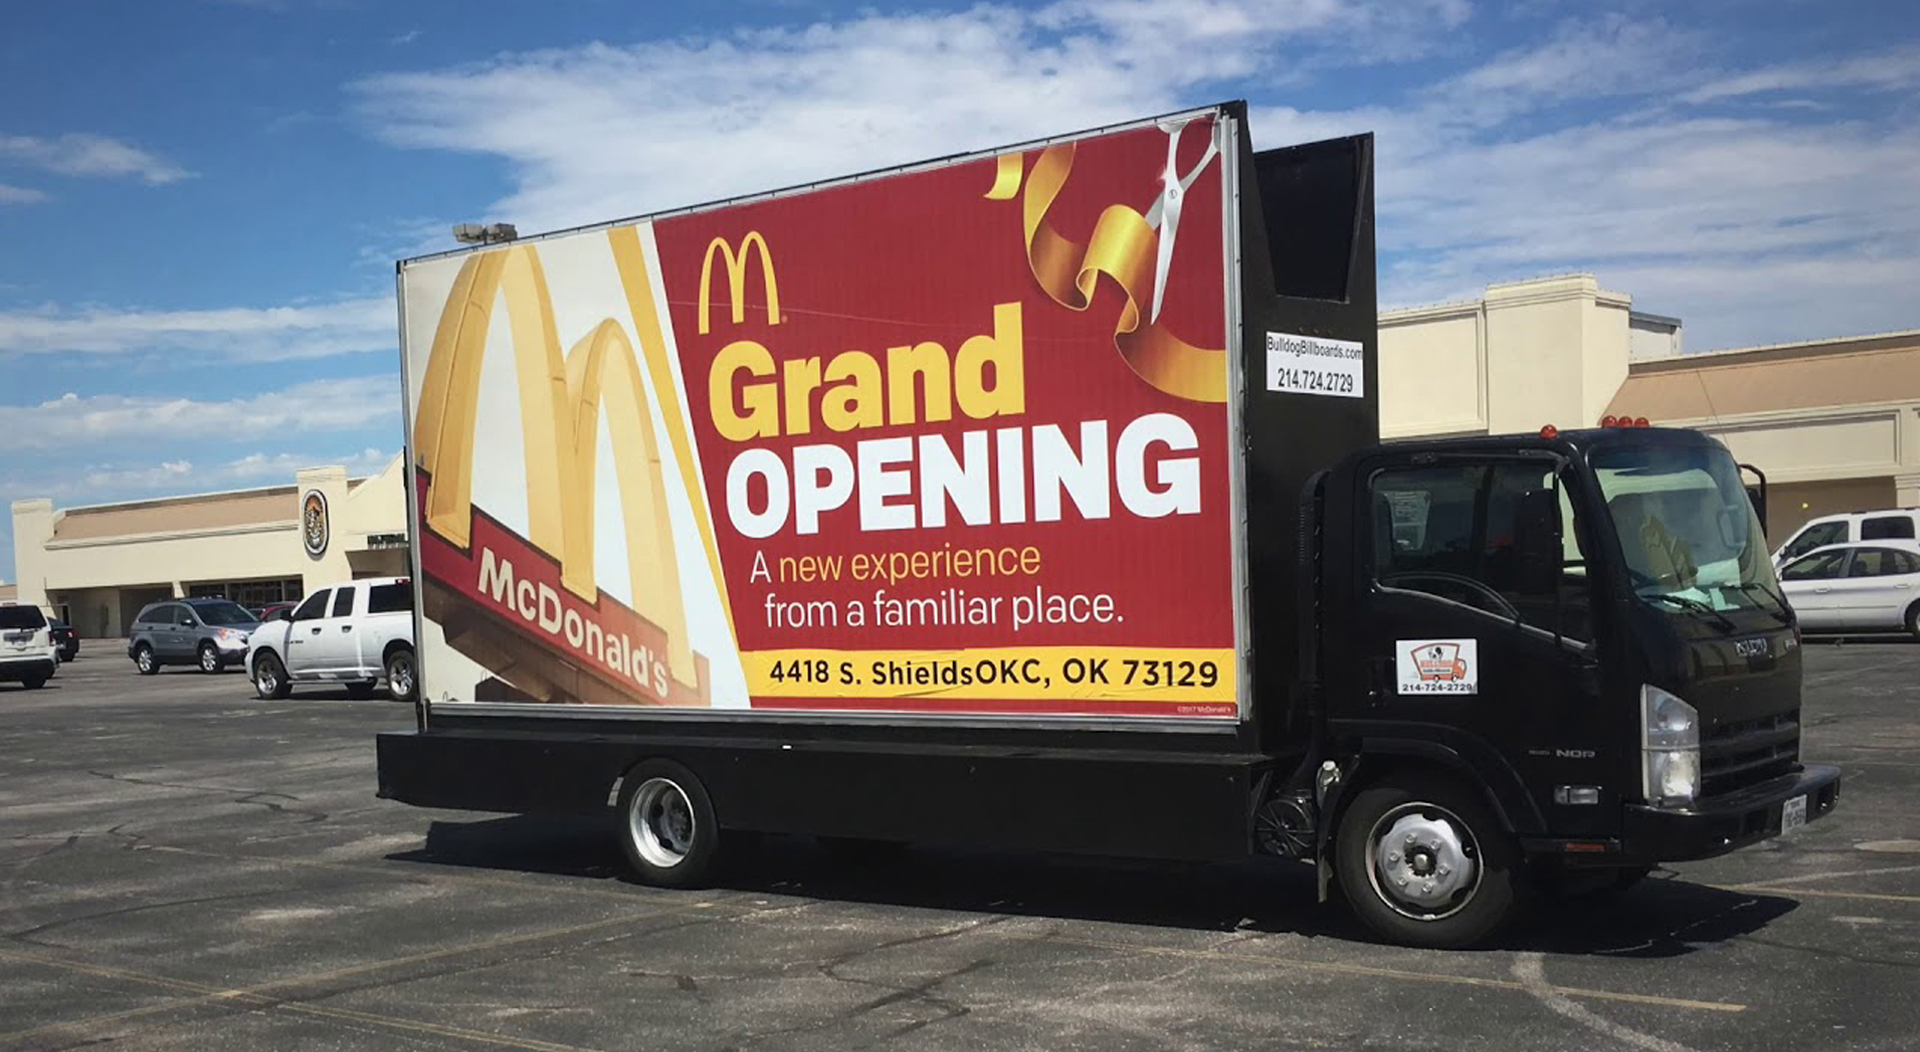 Mobile Retail and Vending, Mobile Marketing, Specialty Trailers